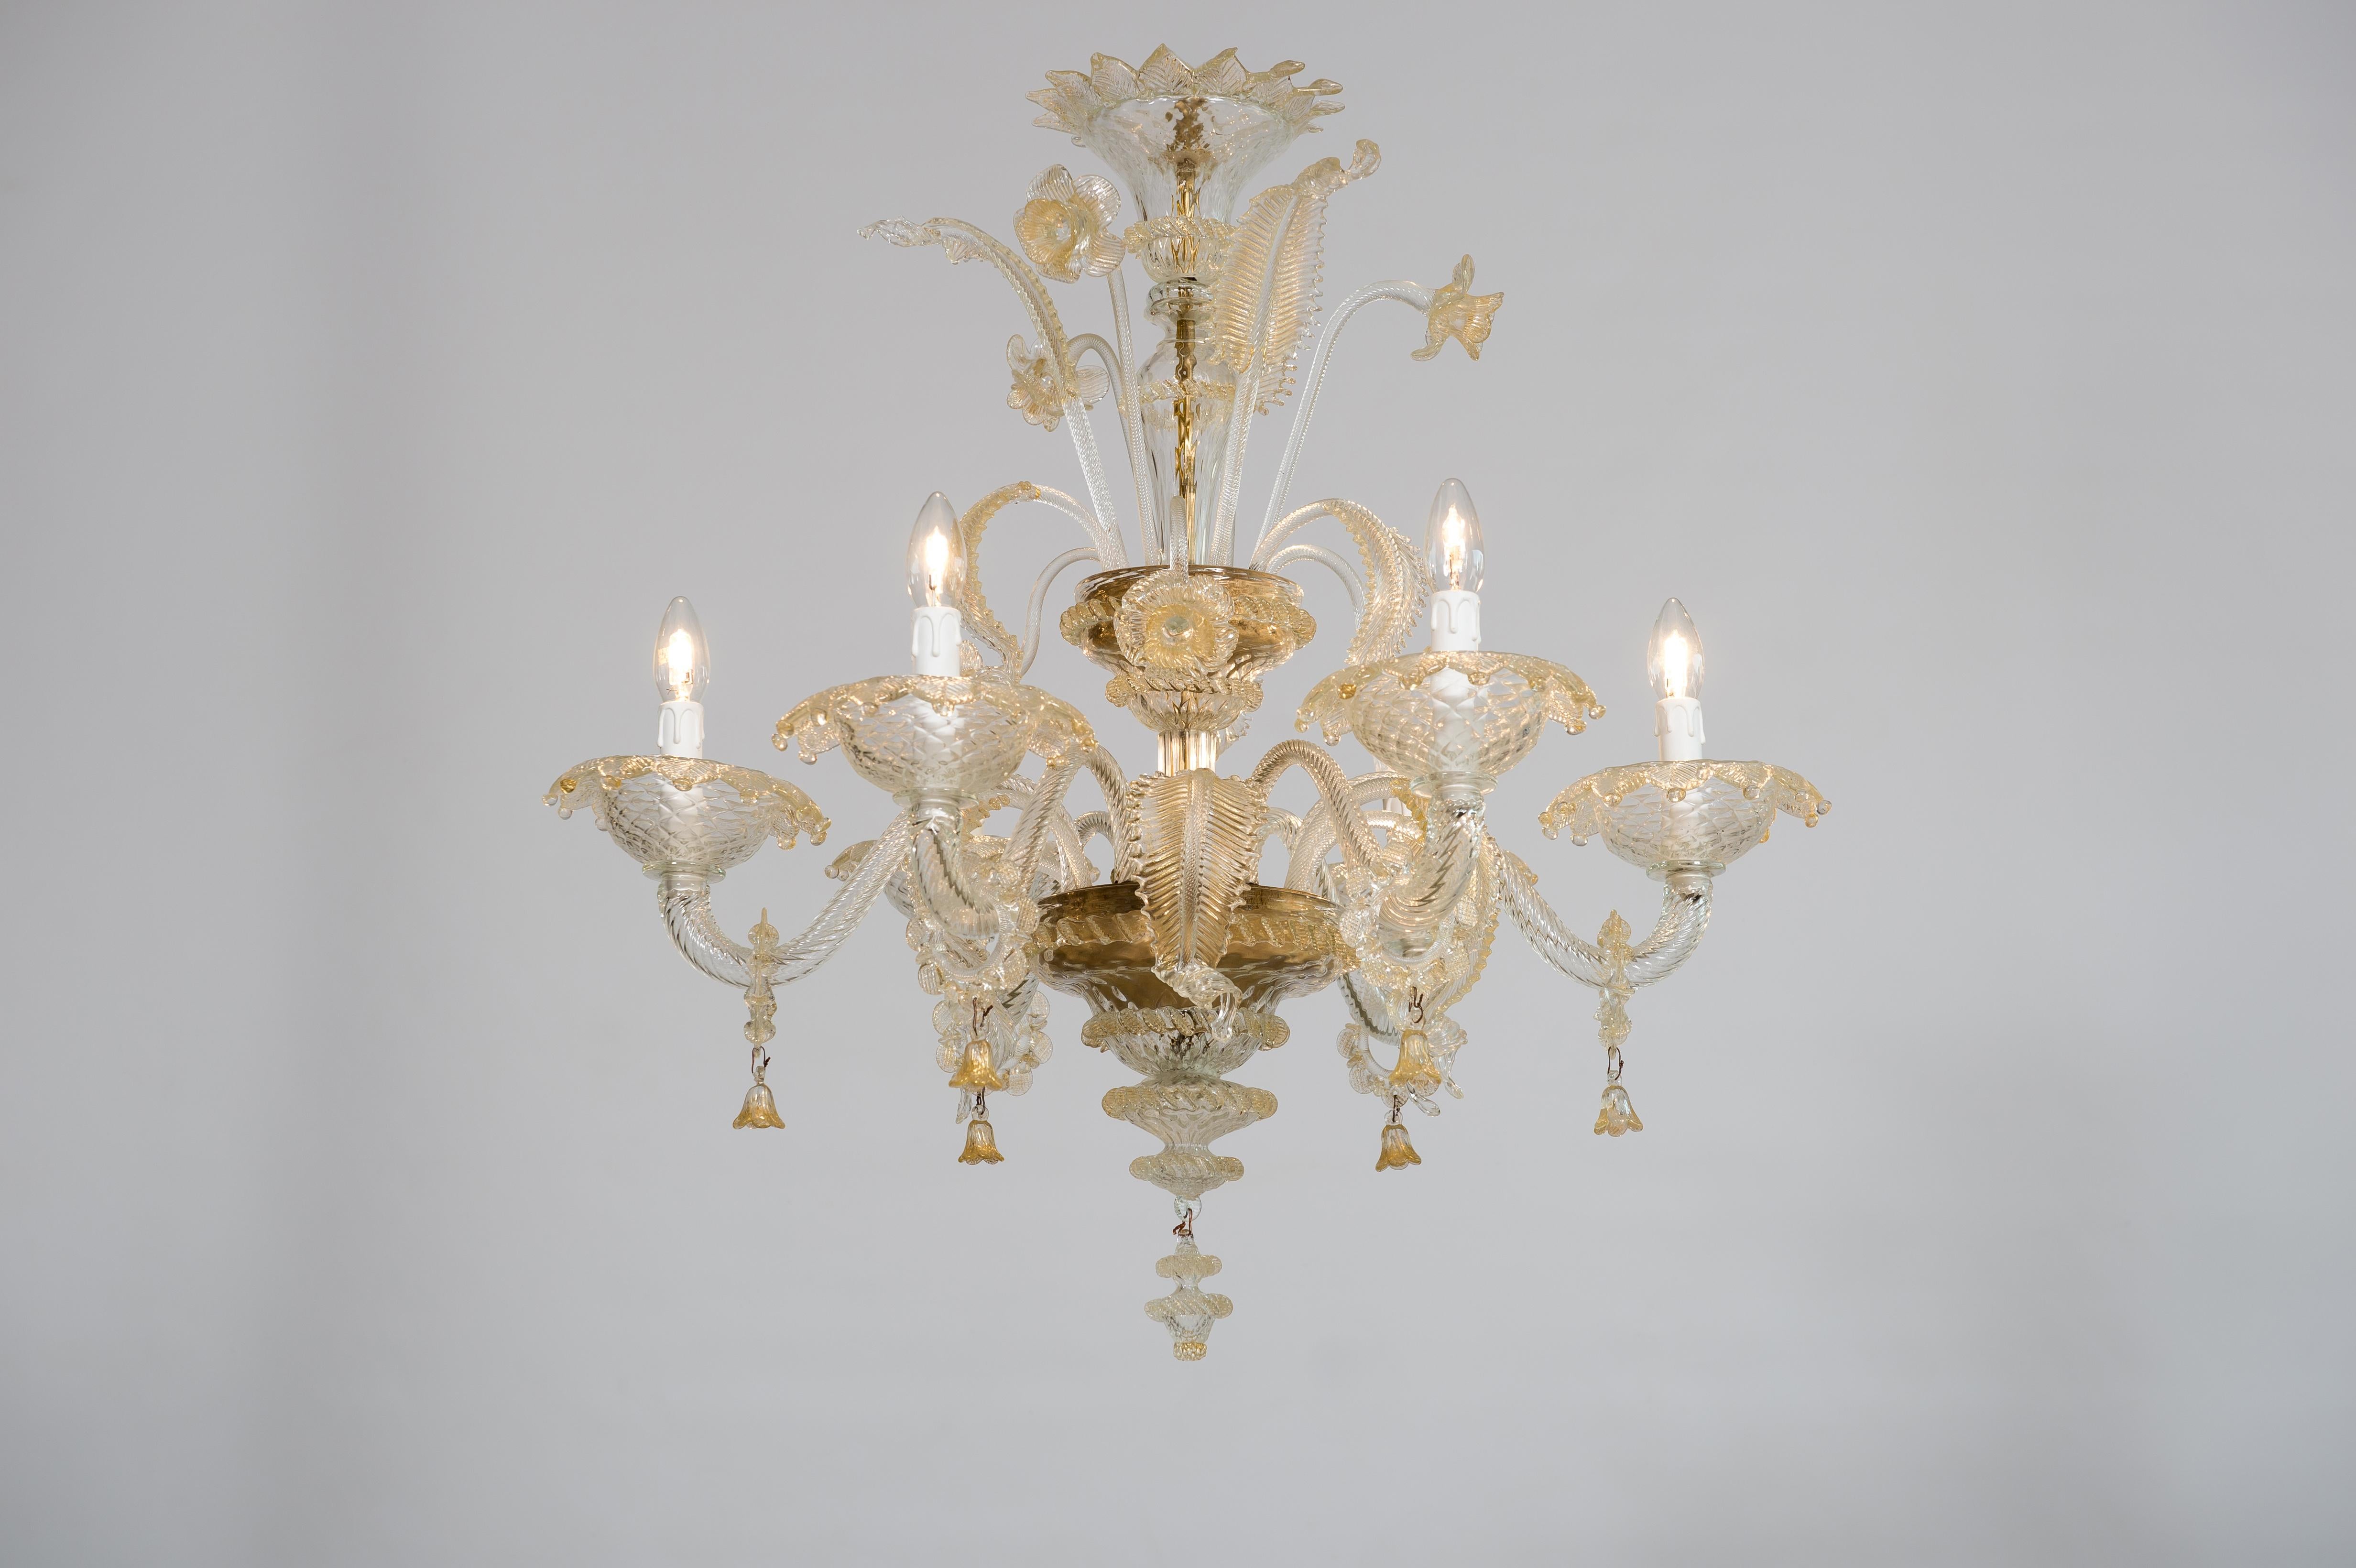 Floral Murano Glass Chandelier with “Riga Dritta” Decorations, 20th Century 8